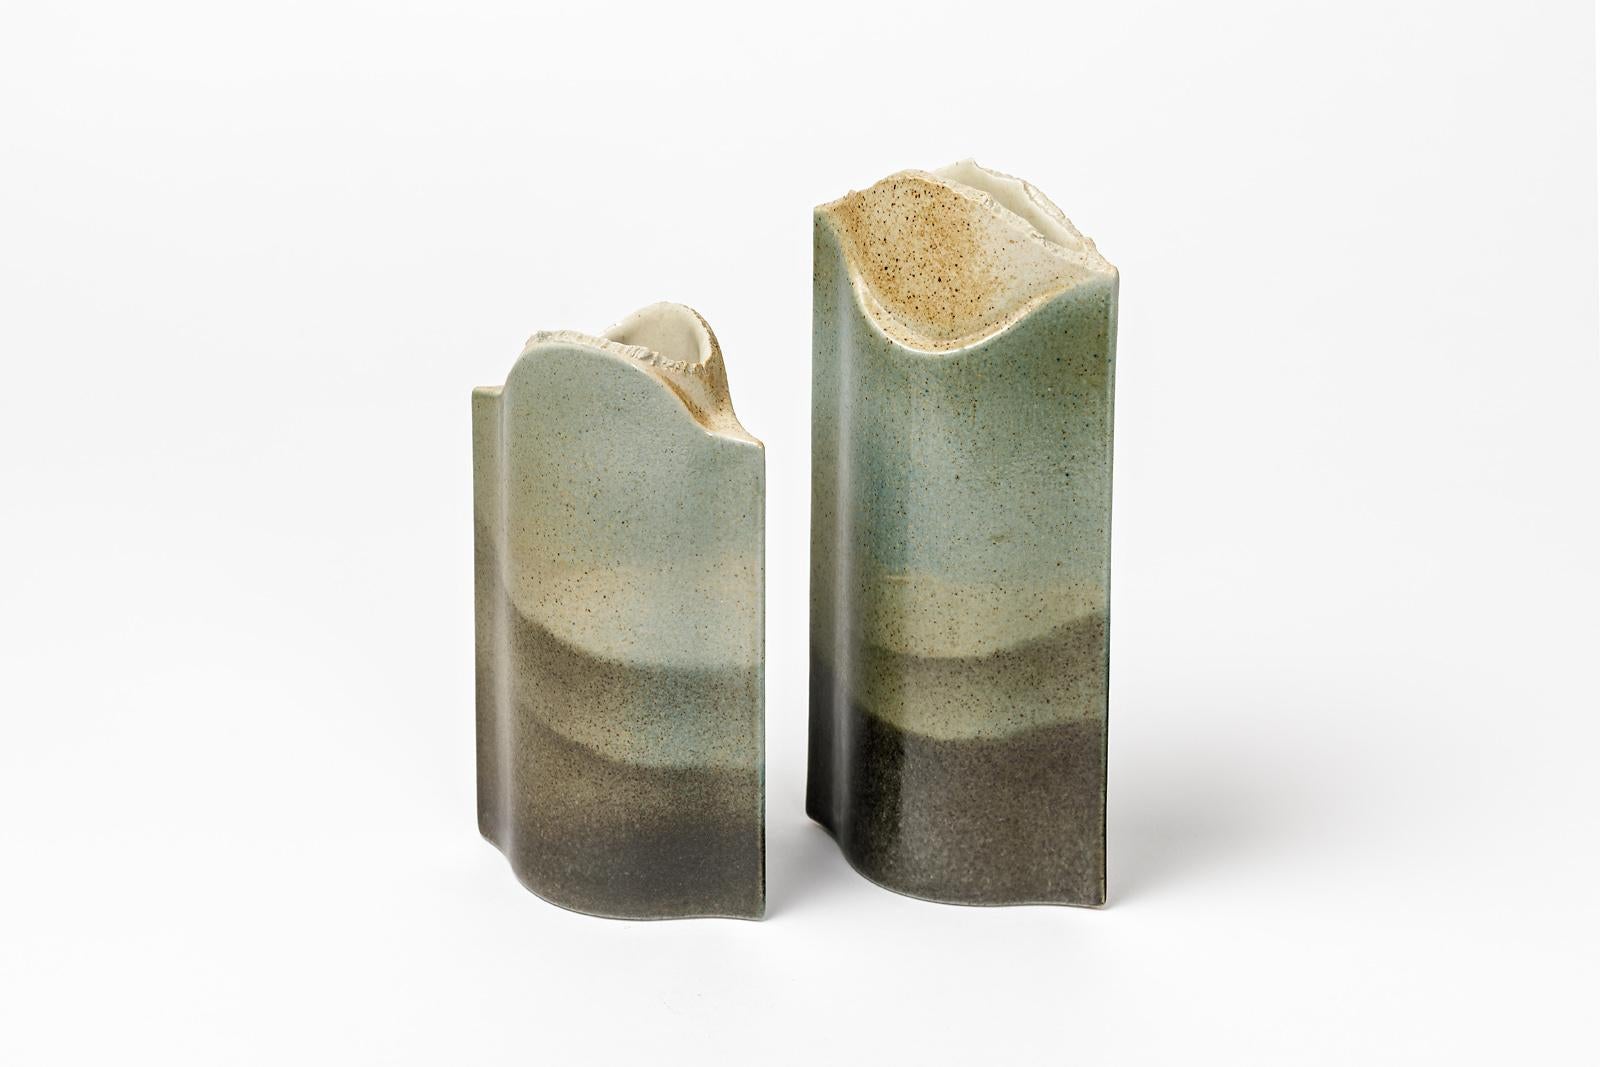 B. Prigent

Pair of ceramic porcelain vase signed by the French artist.
Ceramic glaze color with landscape decoration.

Original perfect conditions 

Signed under the base.

Dimensions: 12 x 11 x 6cm and 23 x 11 x 6cm.